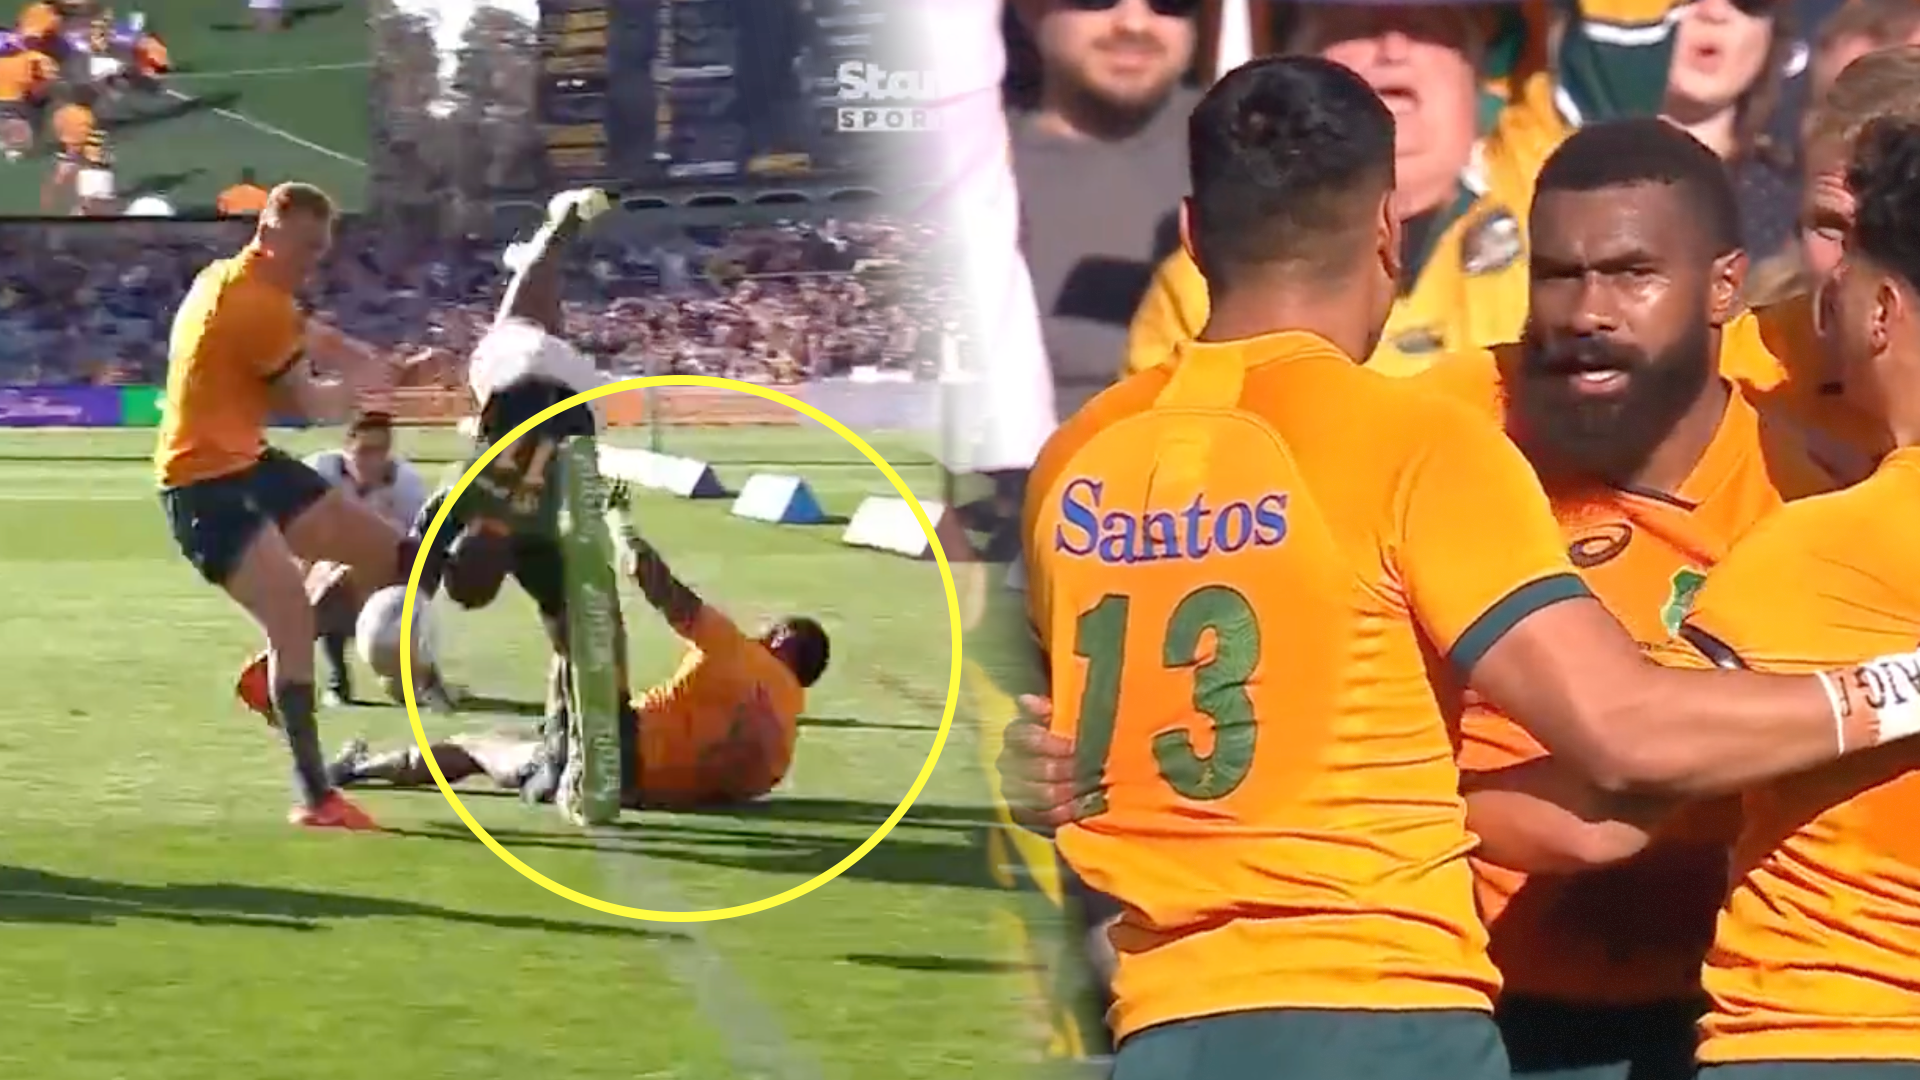 Wallabies great gives controversial take on Koroibete tackle